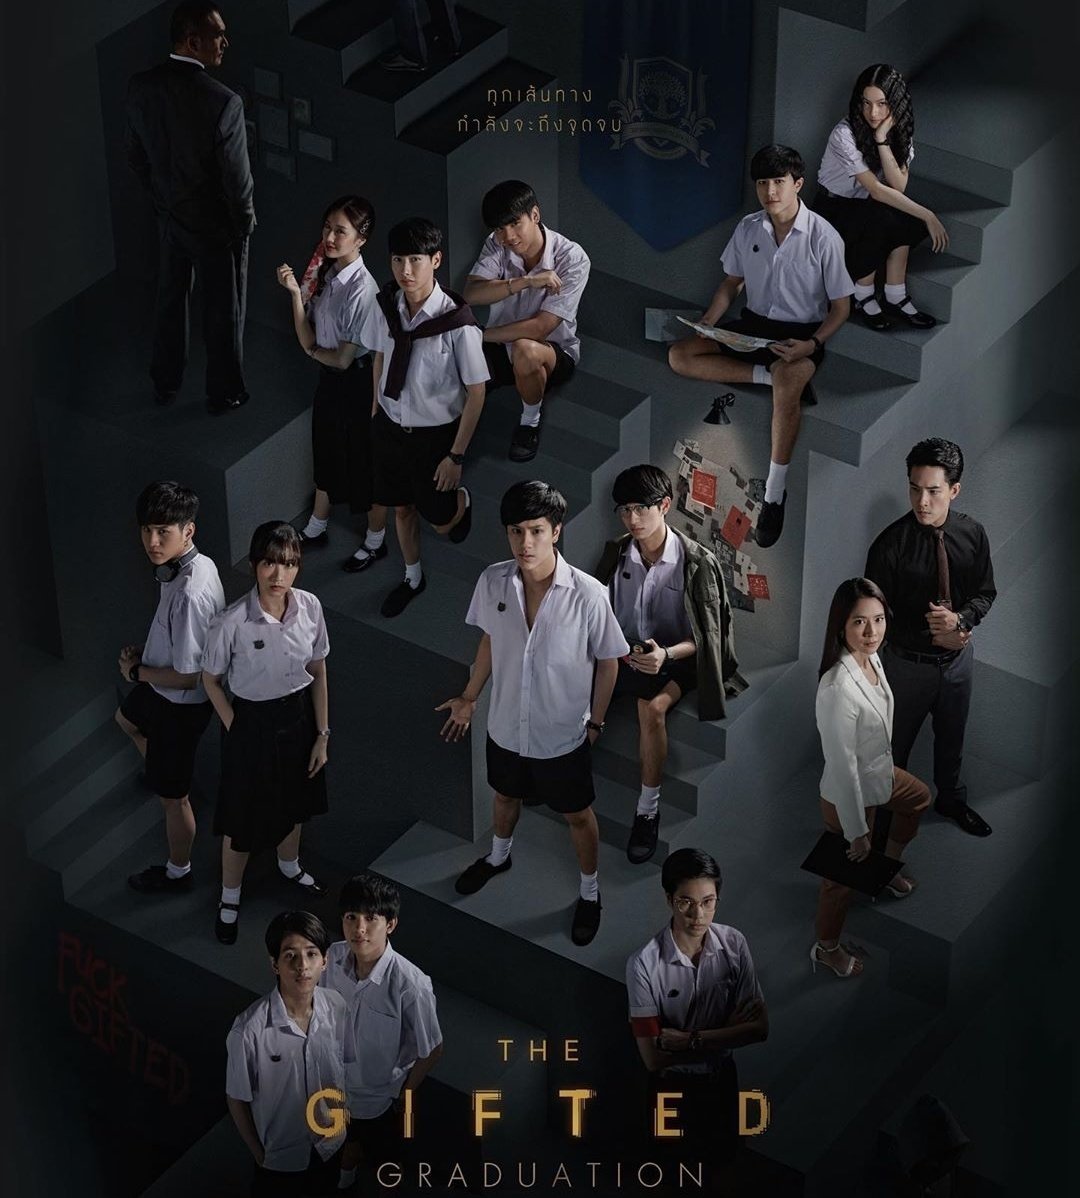 I now understand the main poster.The reason why stairs are used is because it symbolizes hierarchy- not only of social status or wealth, but of principles. The Gifted Graduation is deep - as it also mirrors the rift between youth and adults. #TheGiftedGraduationEP6